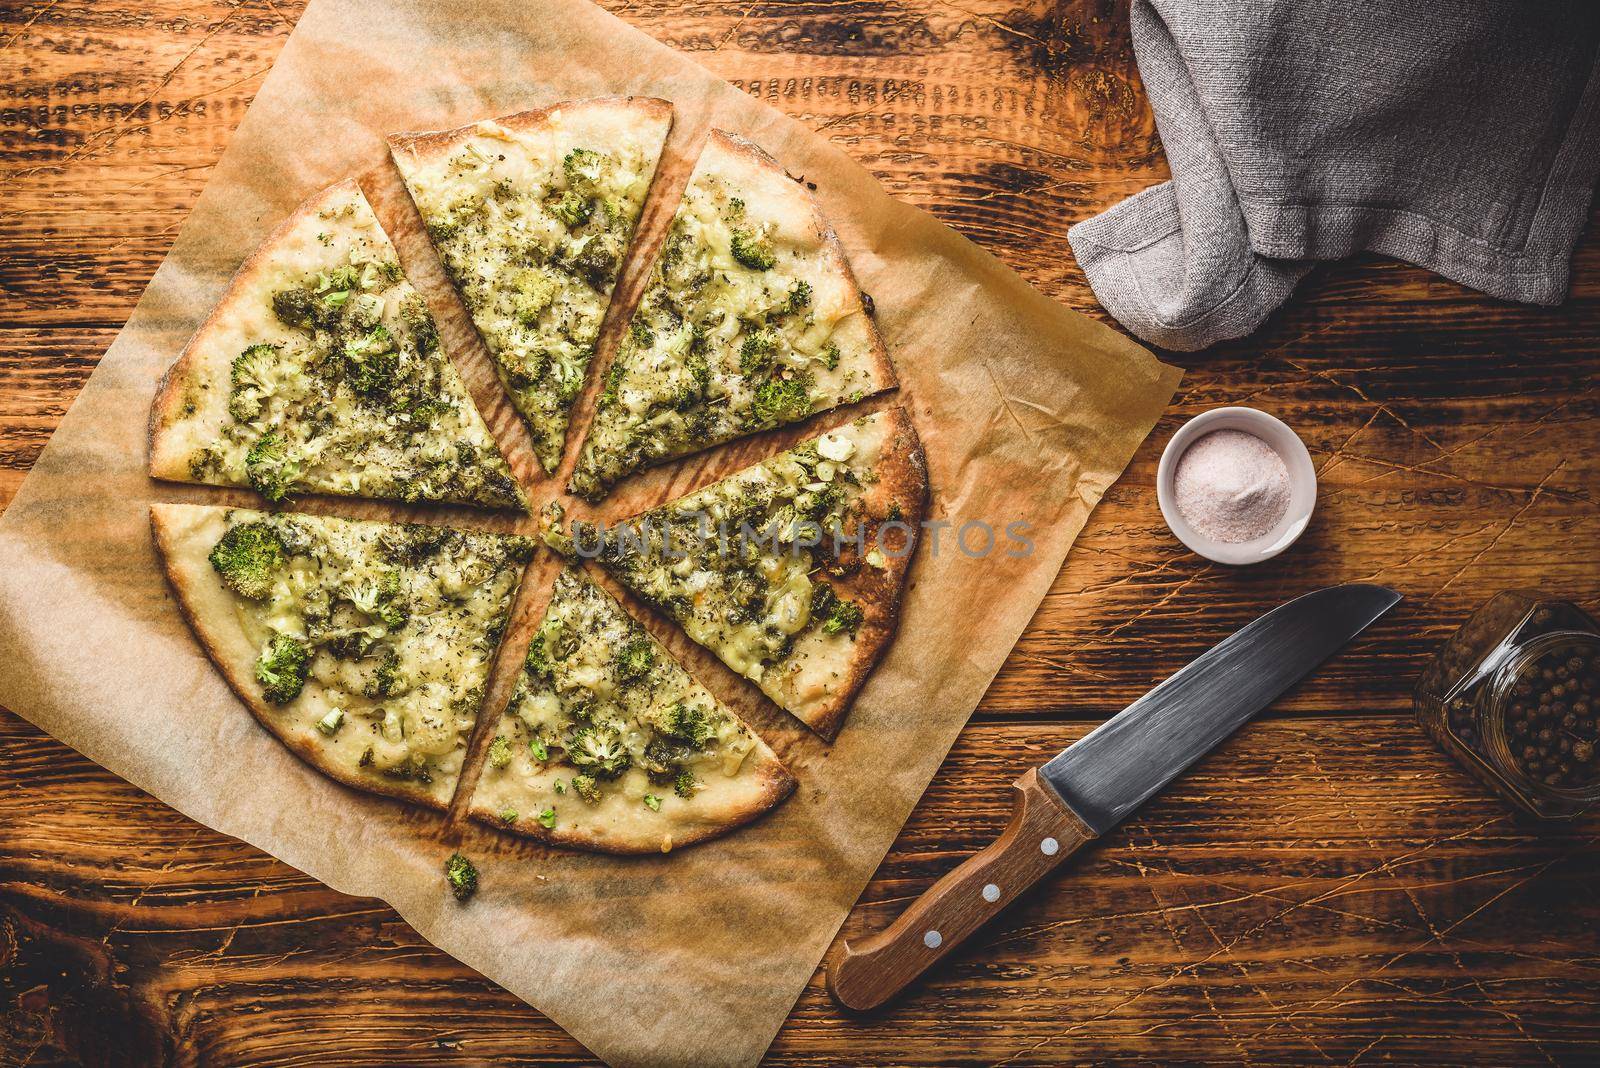 Sliced Italian pizza with broccoli, pesto sauce, herbs and parmesan on baking paper. View from above